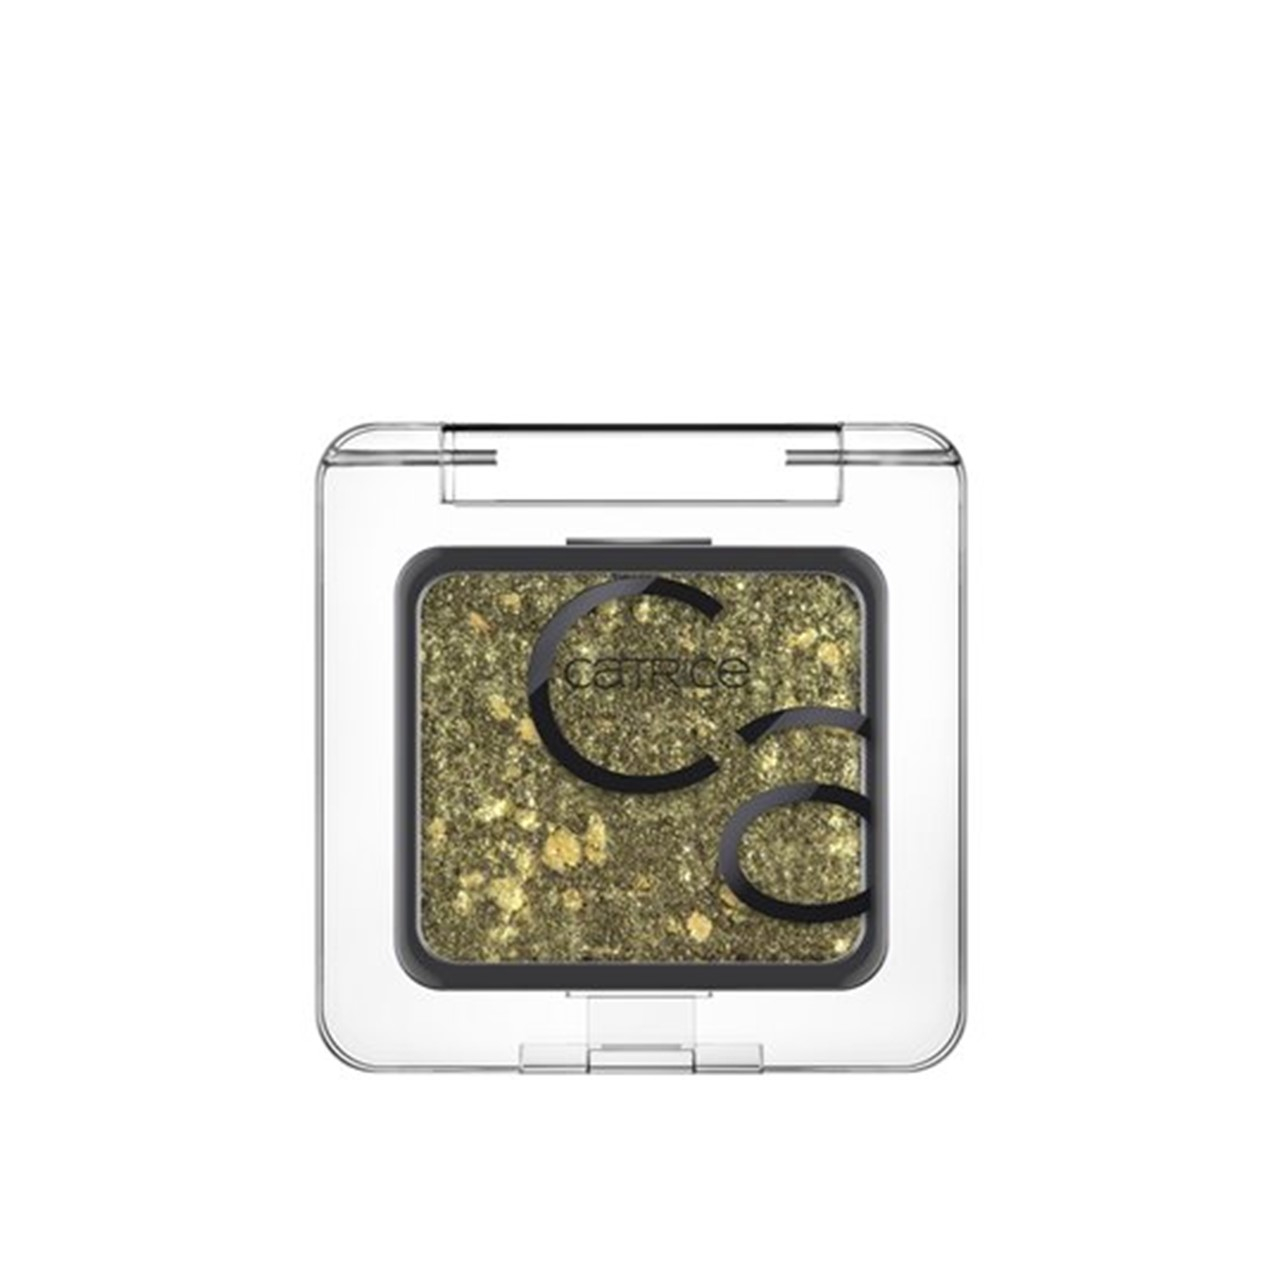 Catrice Art Couleurs Eyeshadow 360 Golden Leaf 2.4g